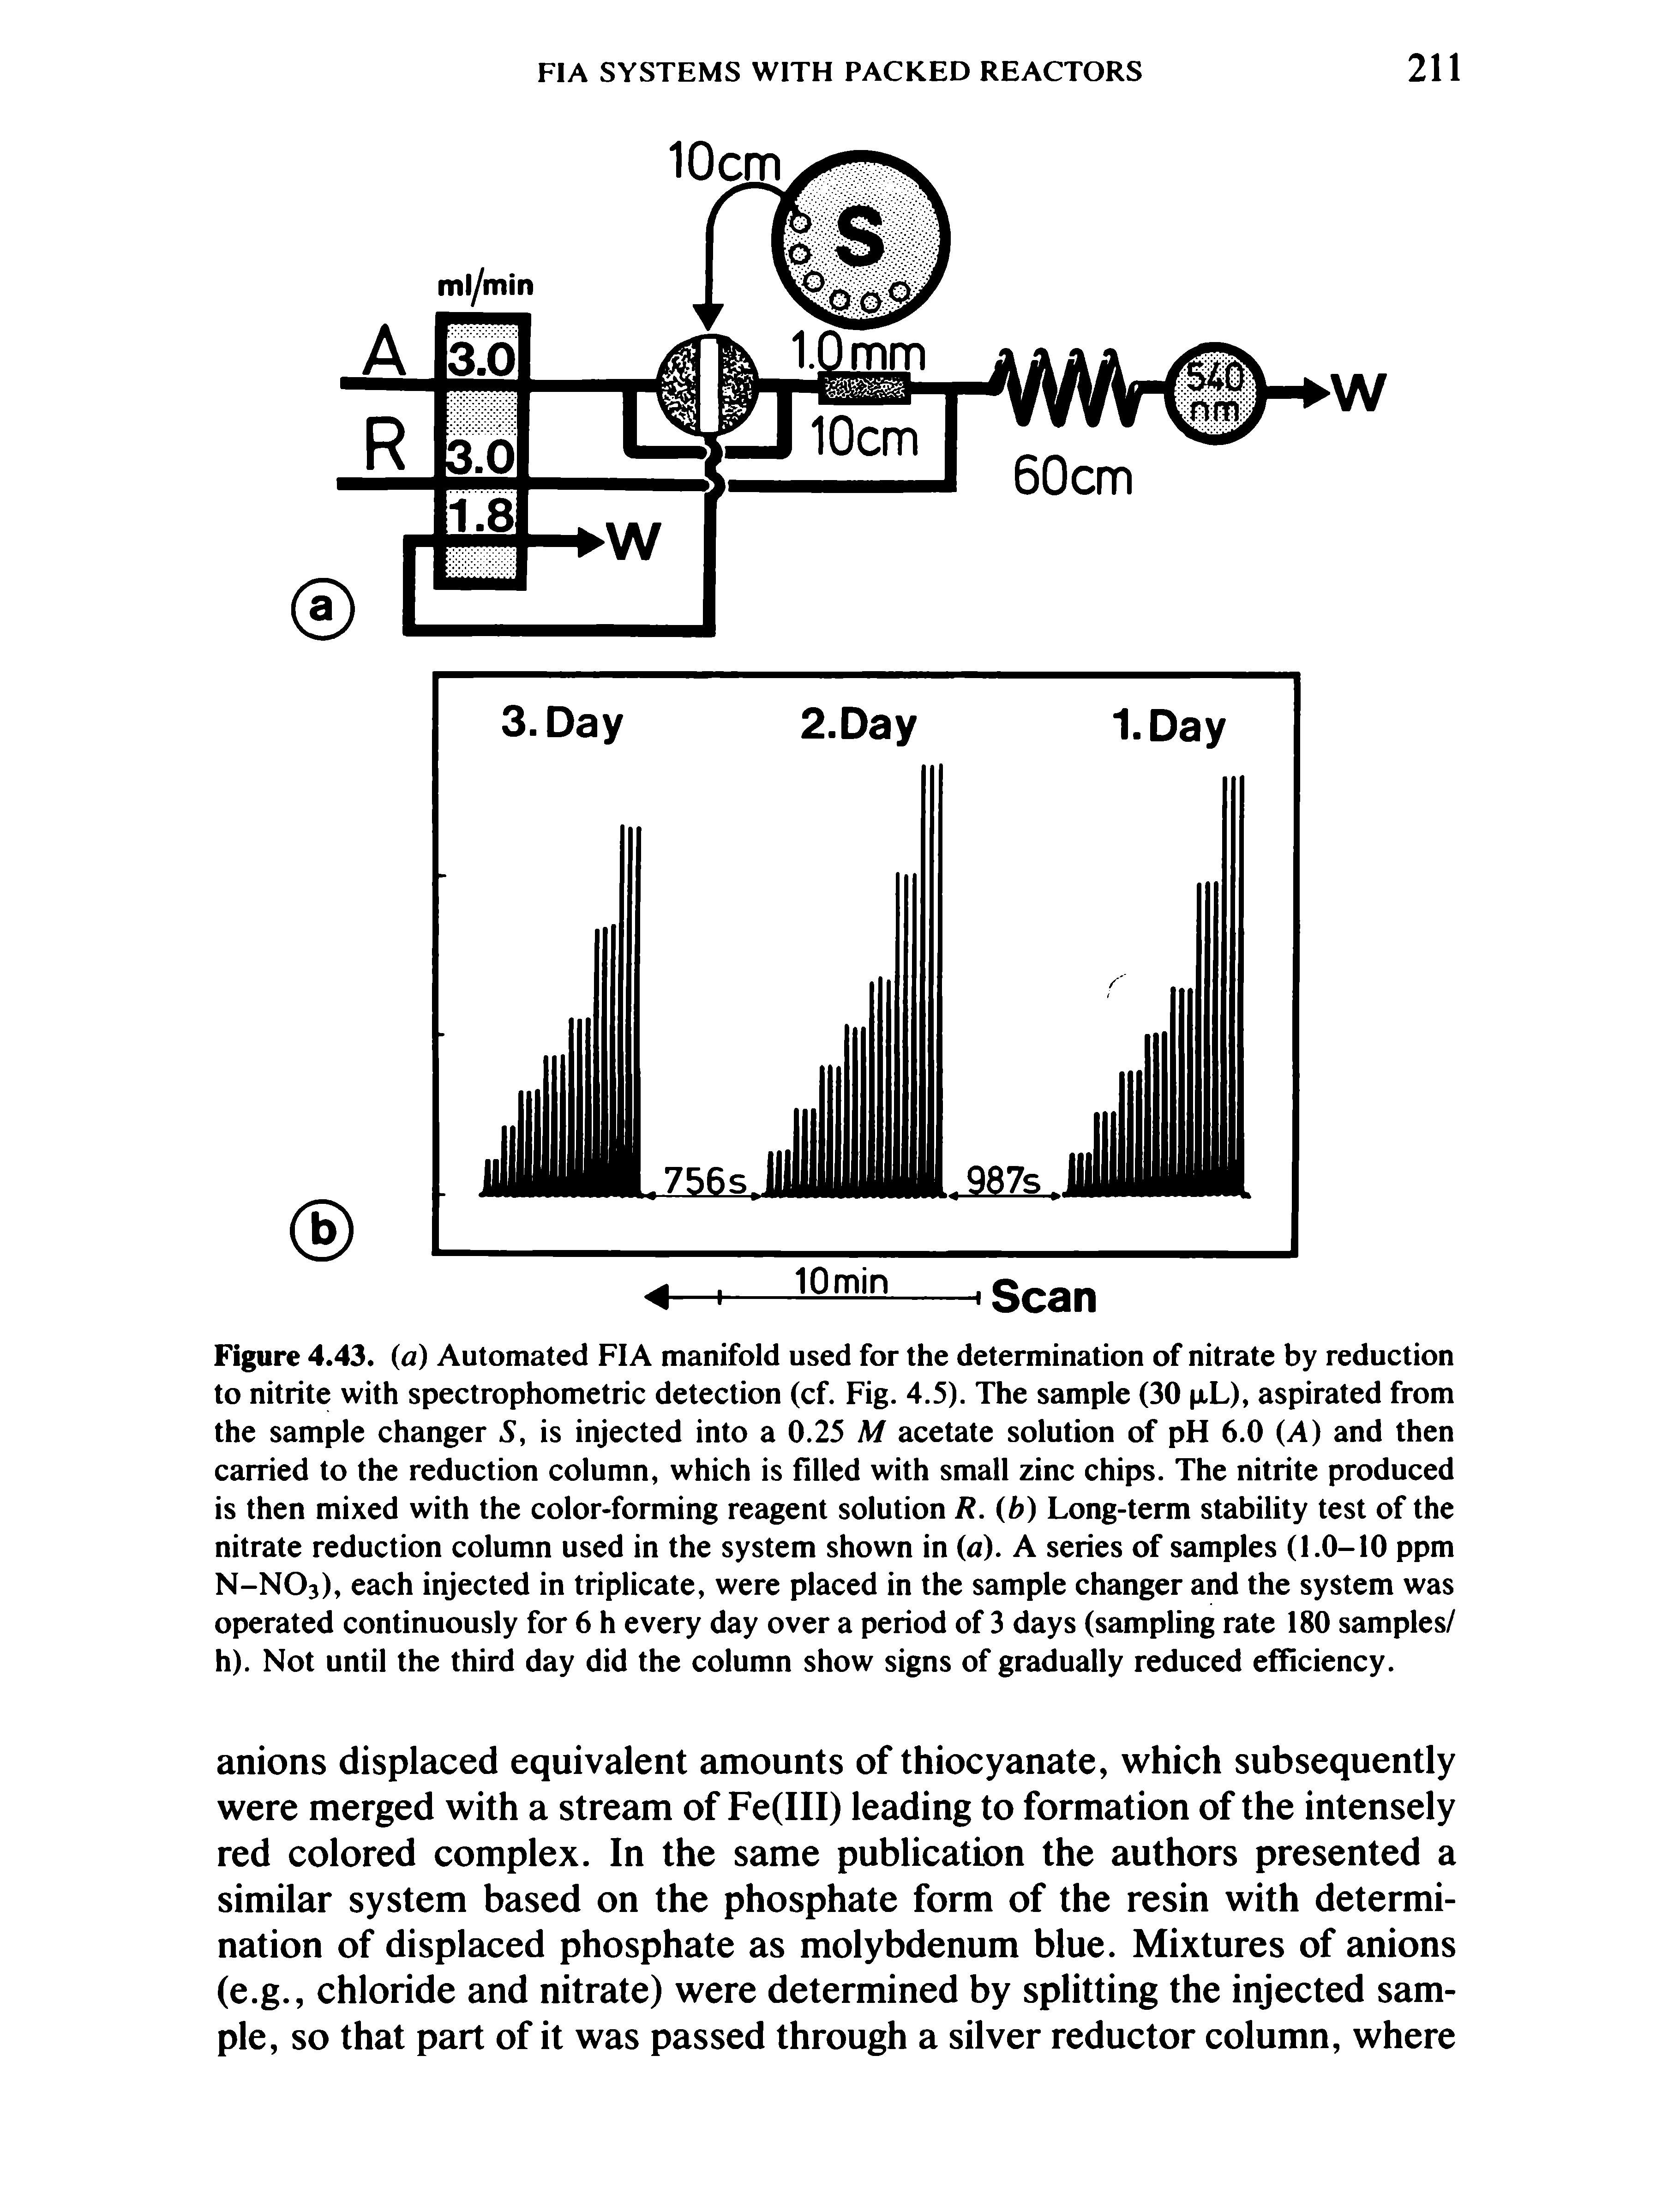 Figure 4.43. (a) Automated FIA manifold used for the determination of nitrate by reduction to nitrite with spectrophometric detection (cf. Fig. 4.5). The sample (30 p.L), aspirated from the sample changer 5, is injected into a 0.25 M acetate solution of pH 6.0 (A) and then carried to the reduction column, which is filled with small zinc chips. The nitrite produced is then mixed with the color-forming reagent solution R. (b) Long-term stability test of the nitrate reduction column used in the system shown in (a). A series of samples (1.0-10 ppm N-NO3), each injected in triplicate, were placed in the sample changer and the system was operated continuously for 6 h every day over a period of 3 days (sampling rate 180 samples/ h). Not until the third day did the column show signs of gradually reduced efficiency.